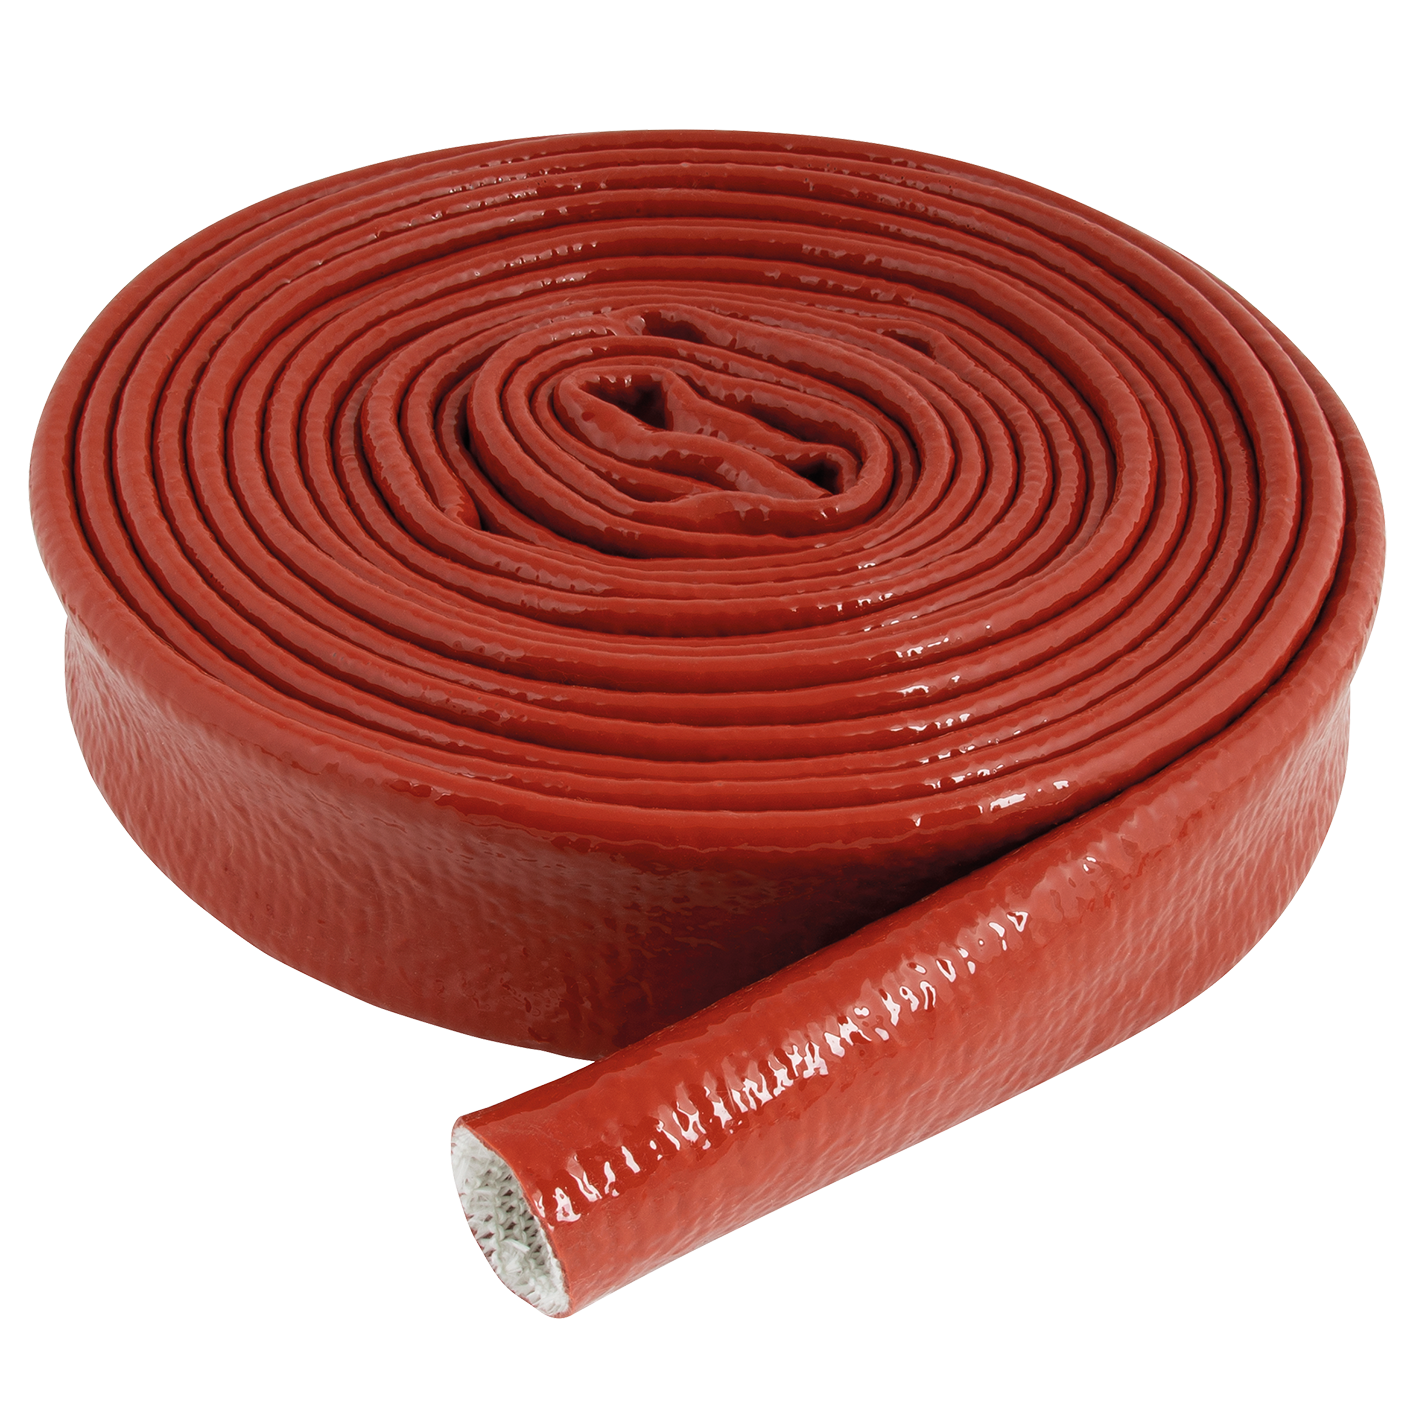 76MM ID RED COIL 15M FIRE SLEEVE